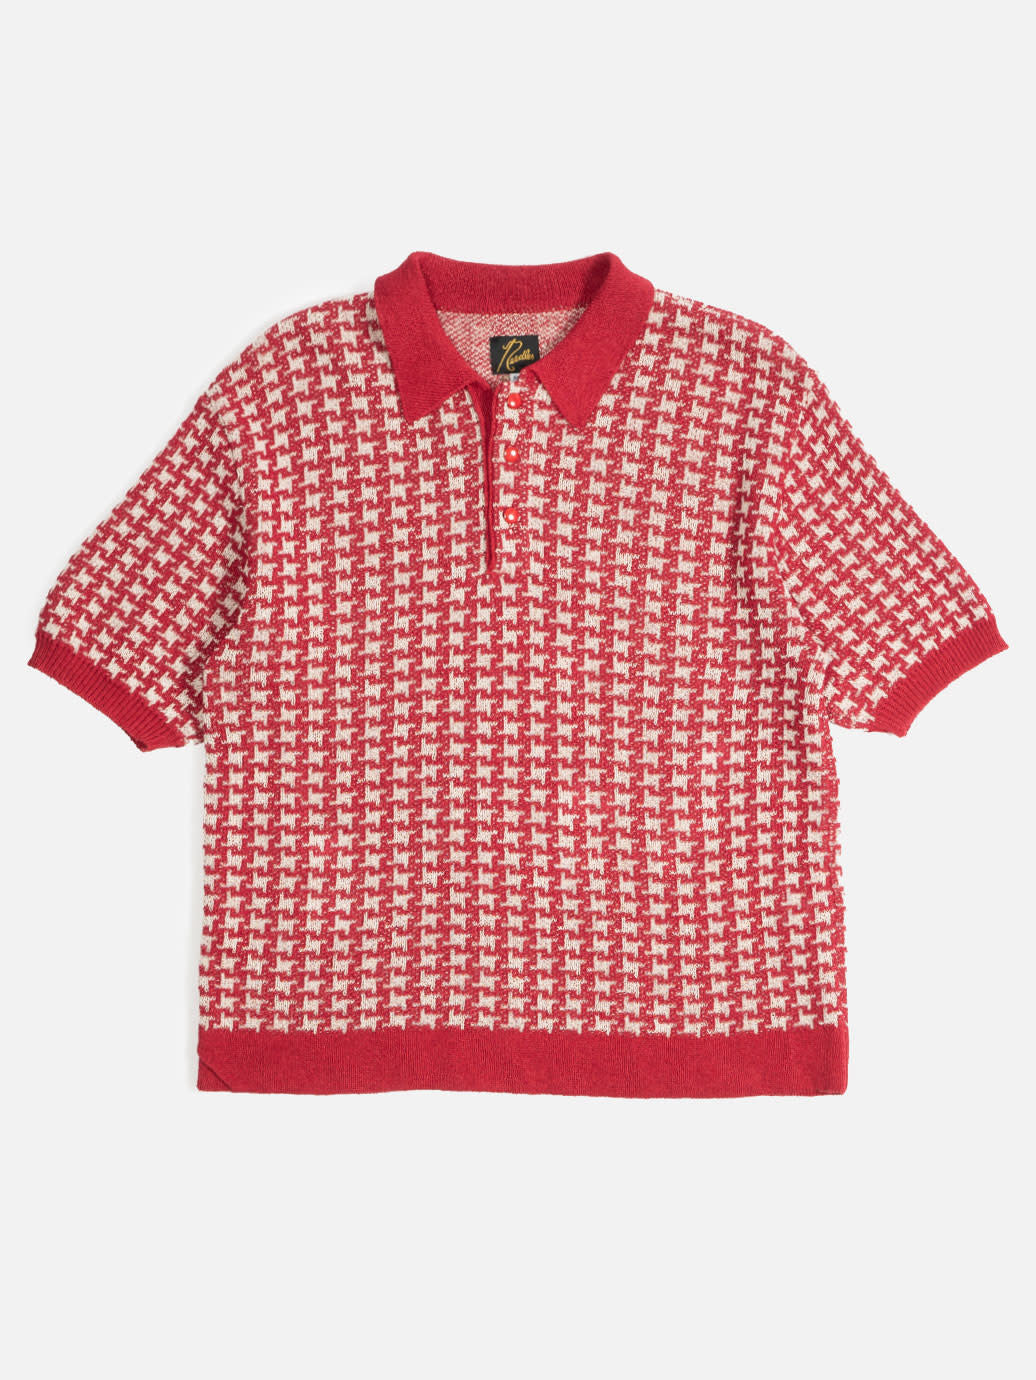 Needles Polo Sweater - Houndstooth Red